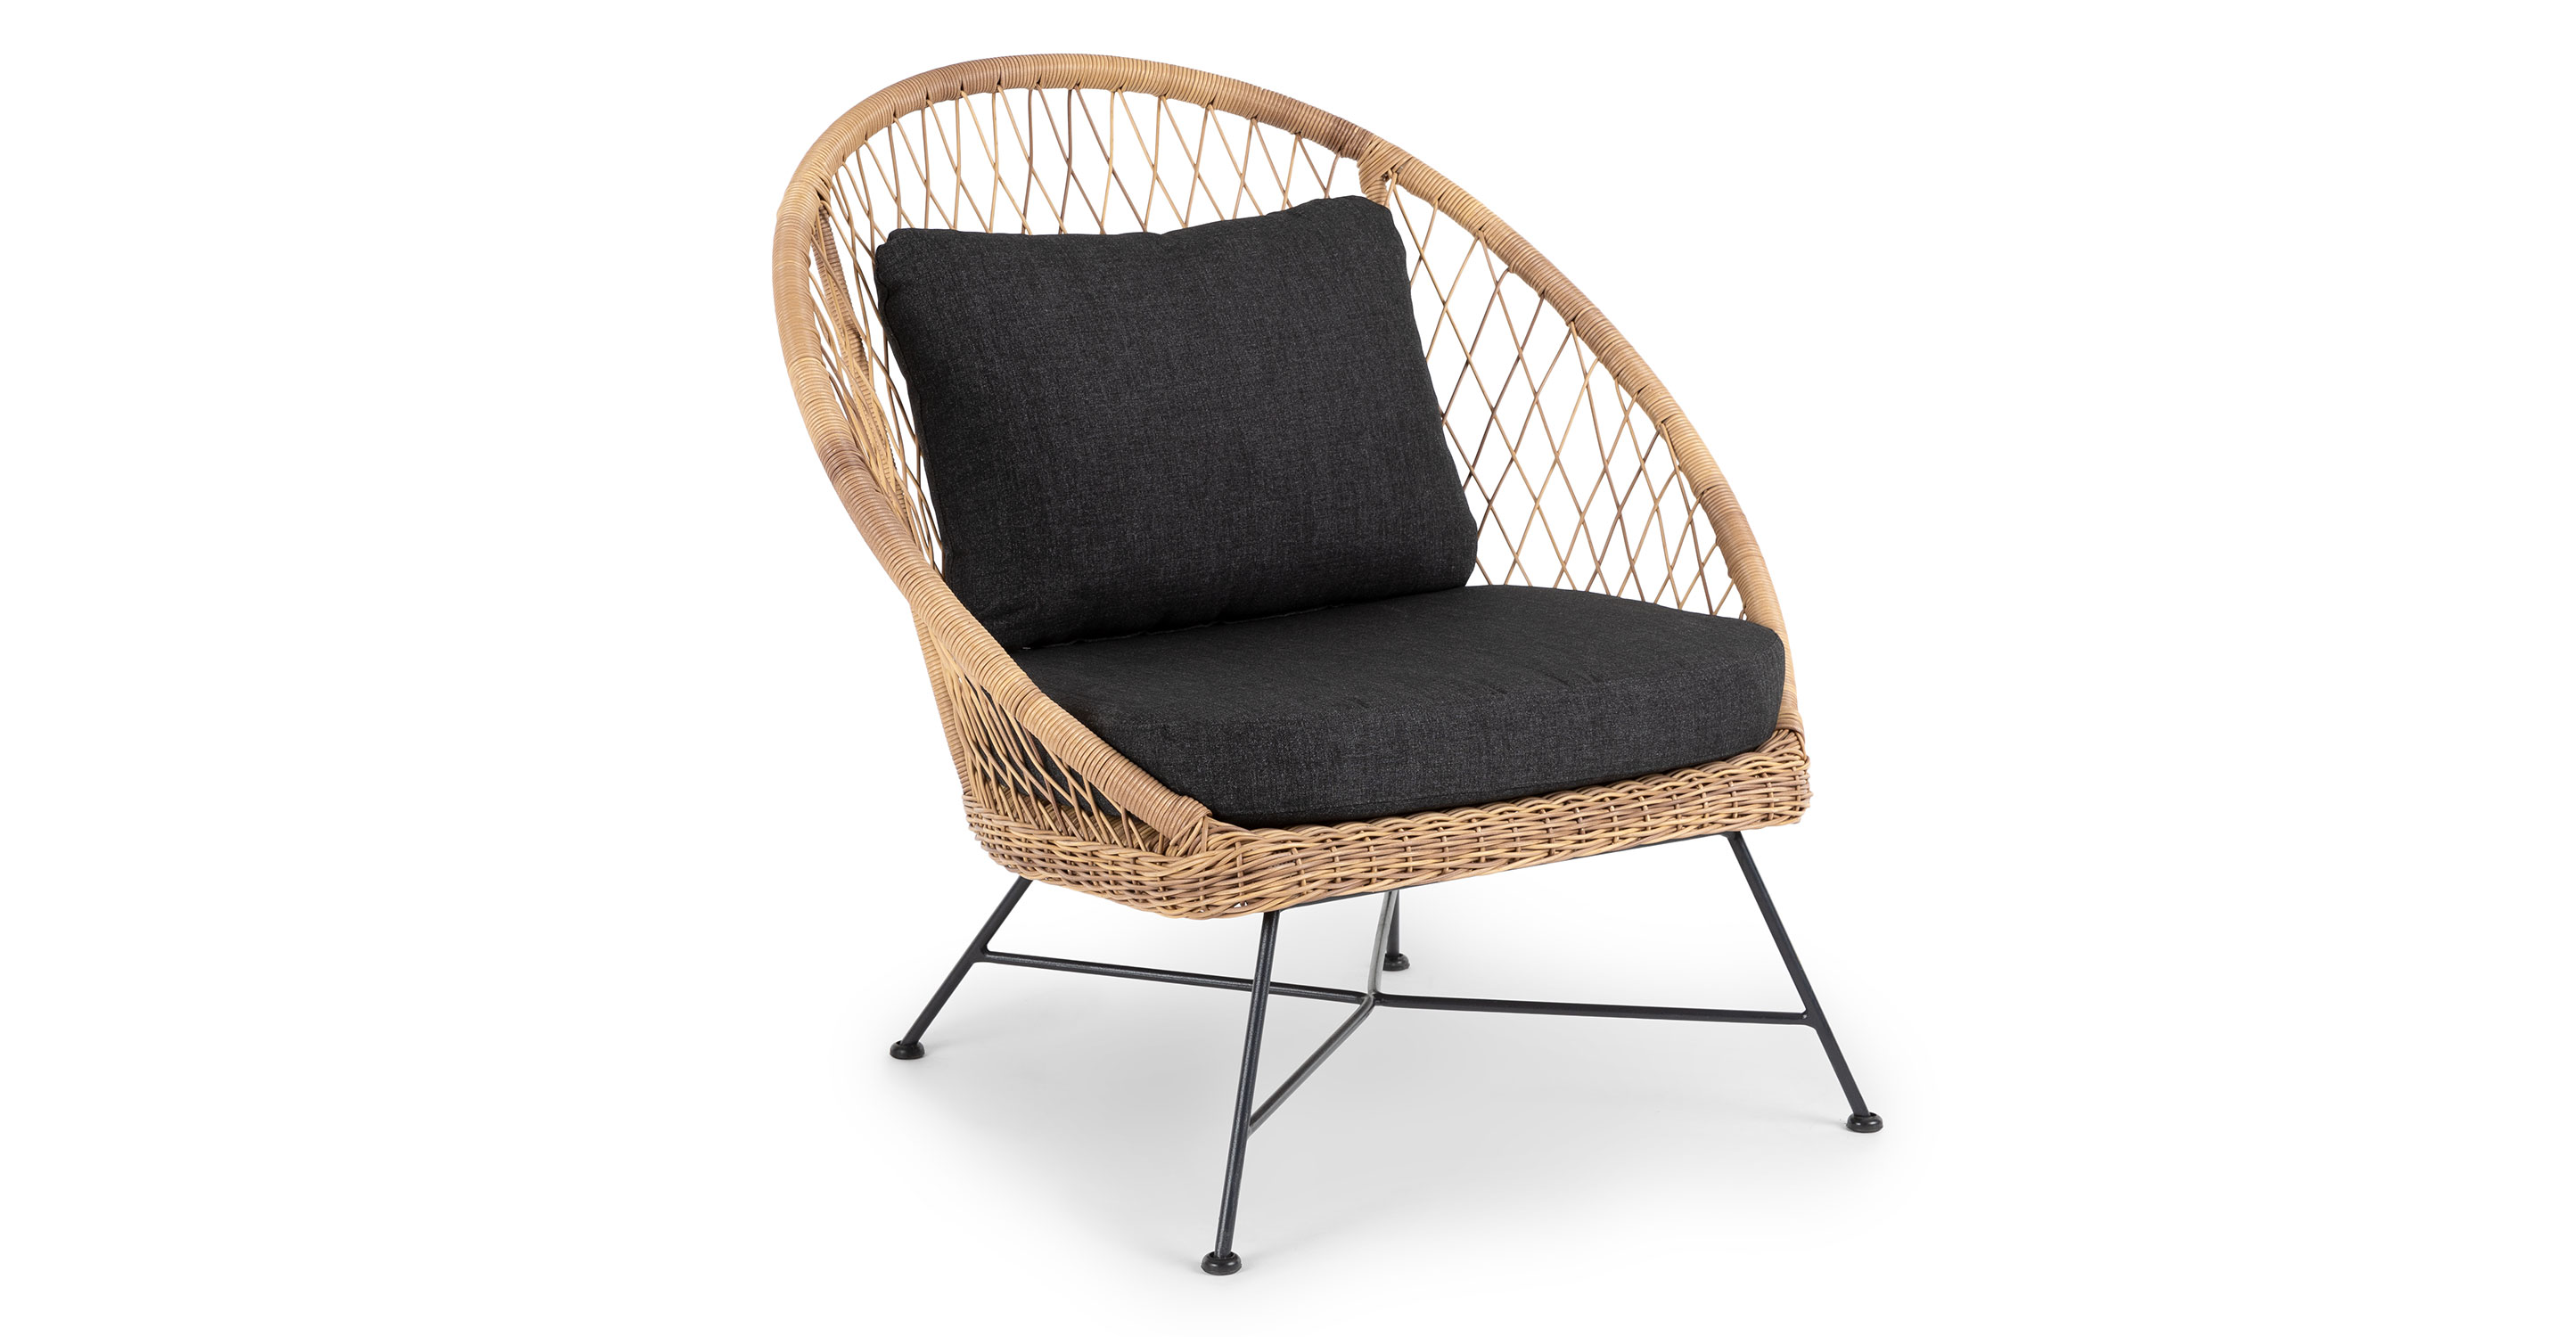 Wicker Outdoor Lounge Chair W Slate, Grey Lounge Chairs Outdoor